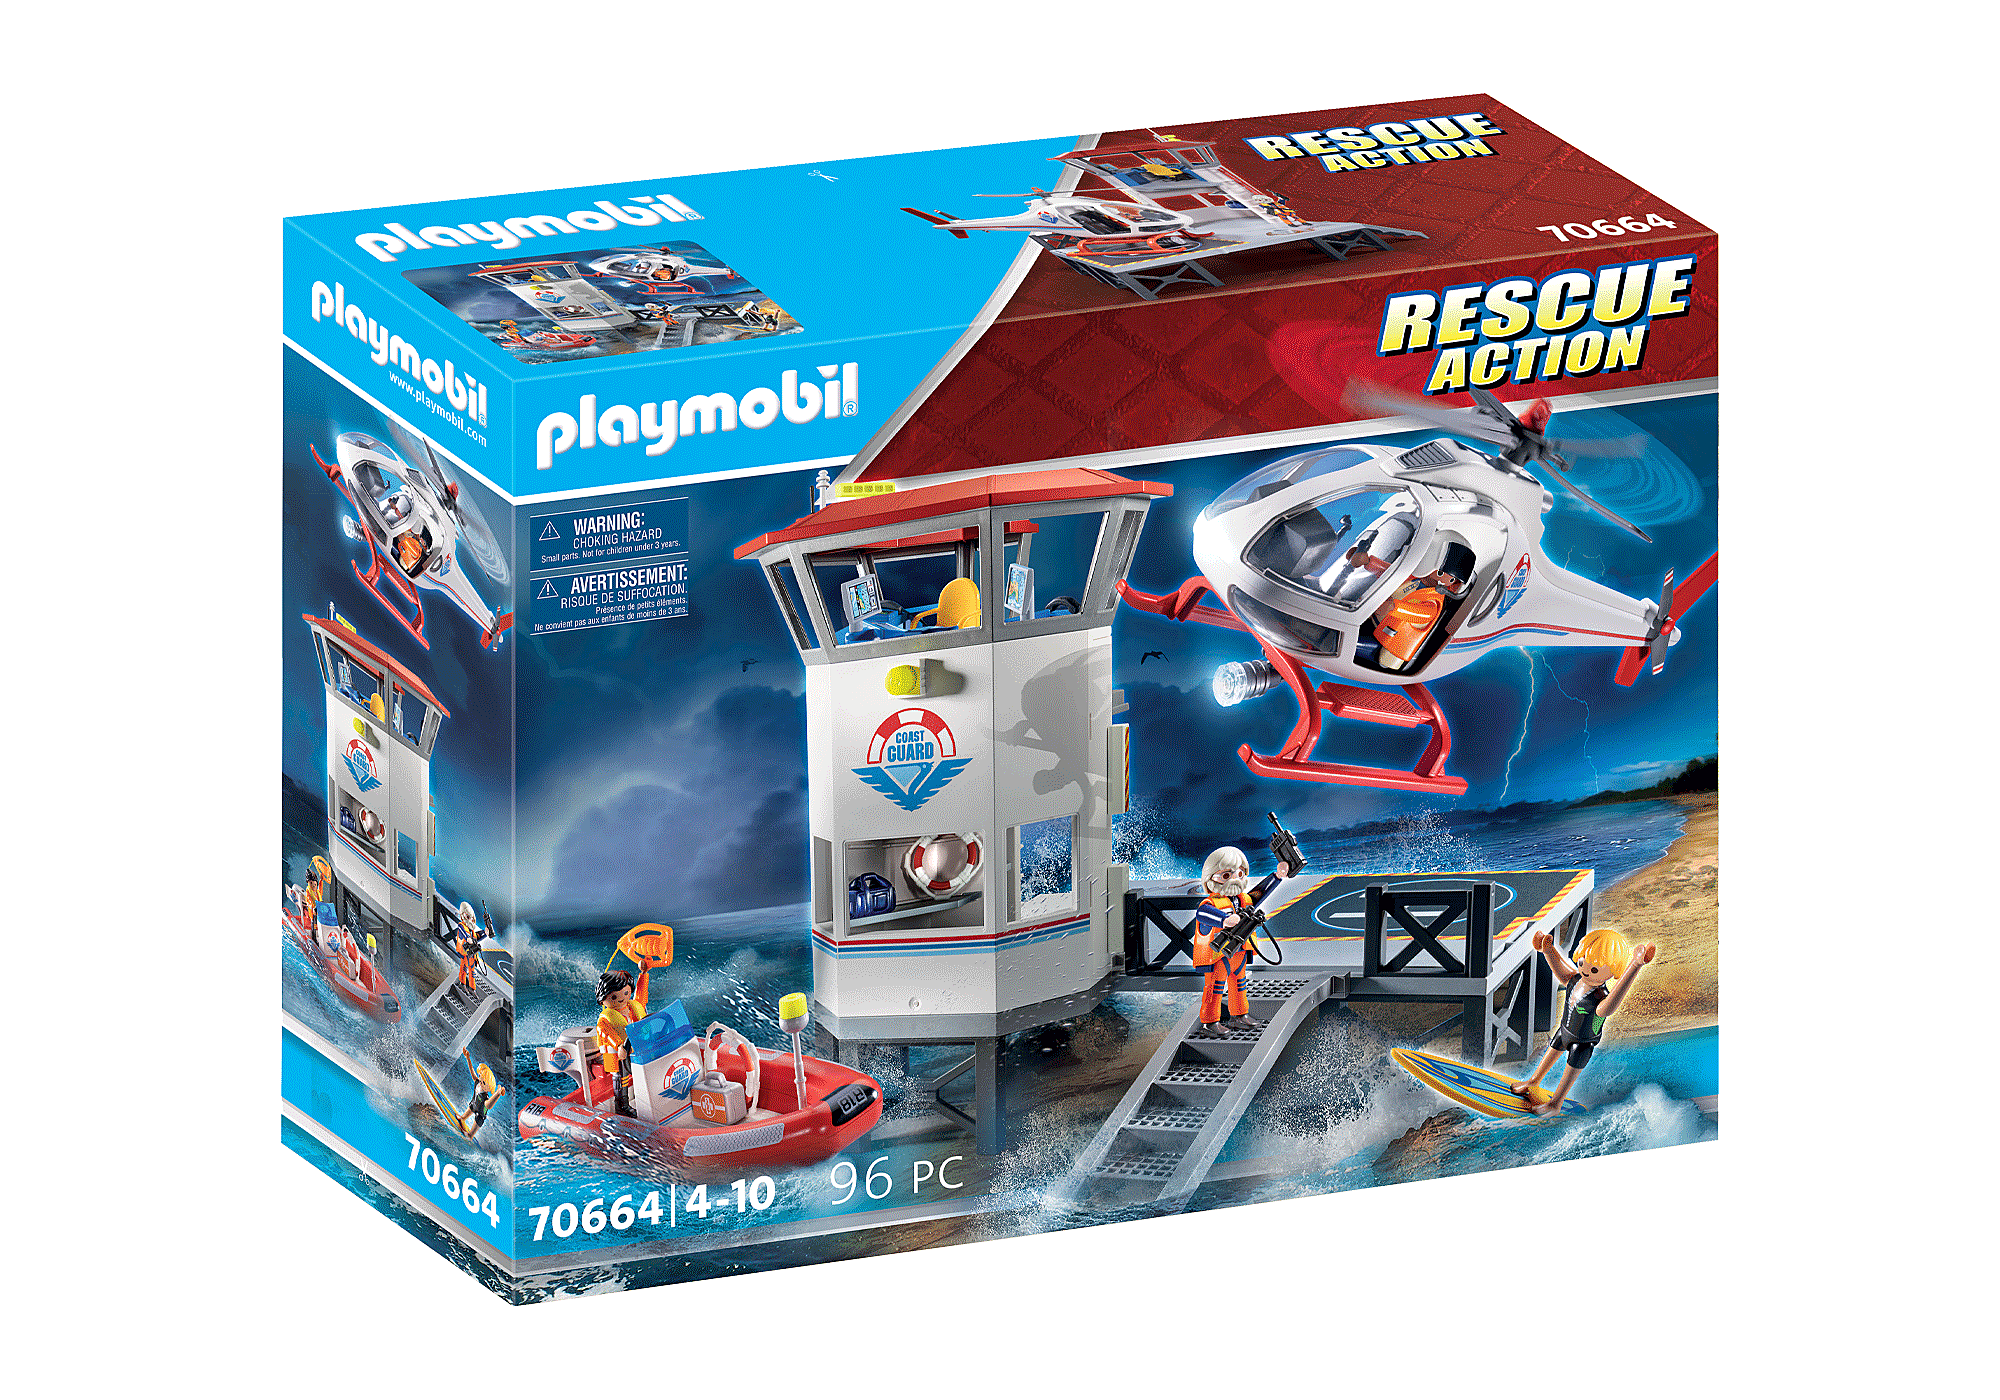 Playmobil My Figures: Rescue Mission Playset, Playmobil